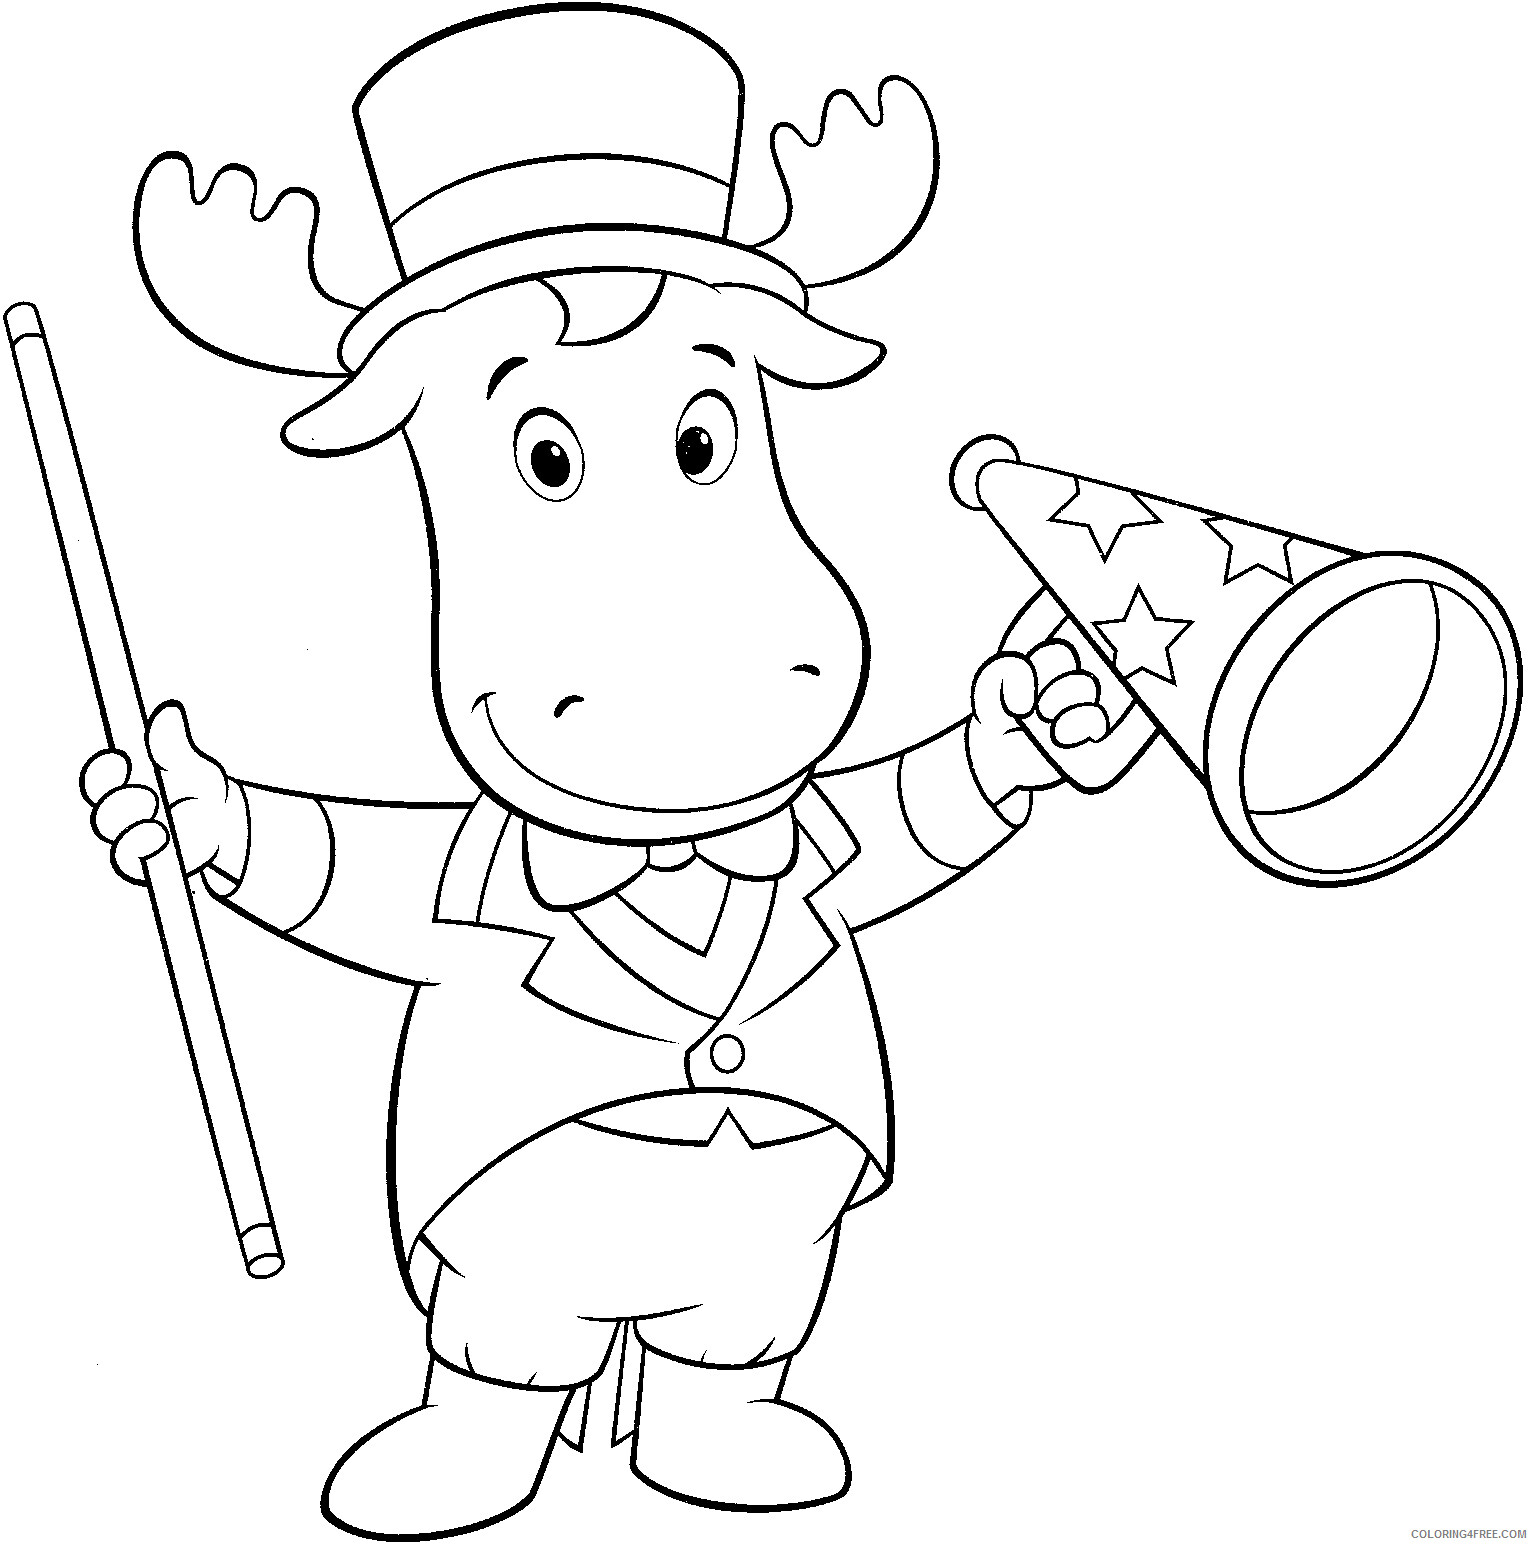 Backyardigans Coloring Pages TV Film Tyrone Backyardigans Printable 2020 00556 Coloring4free